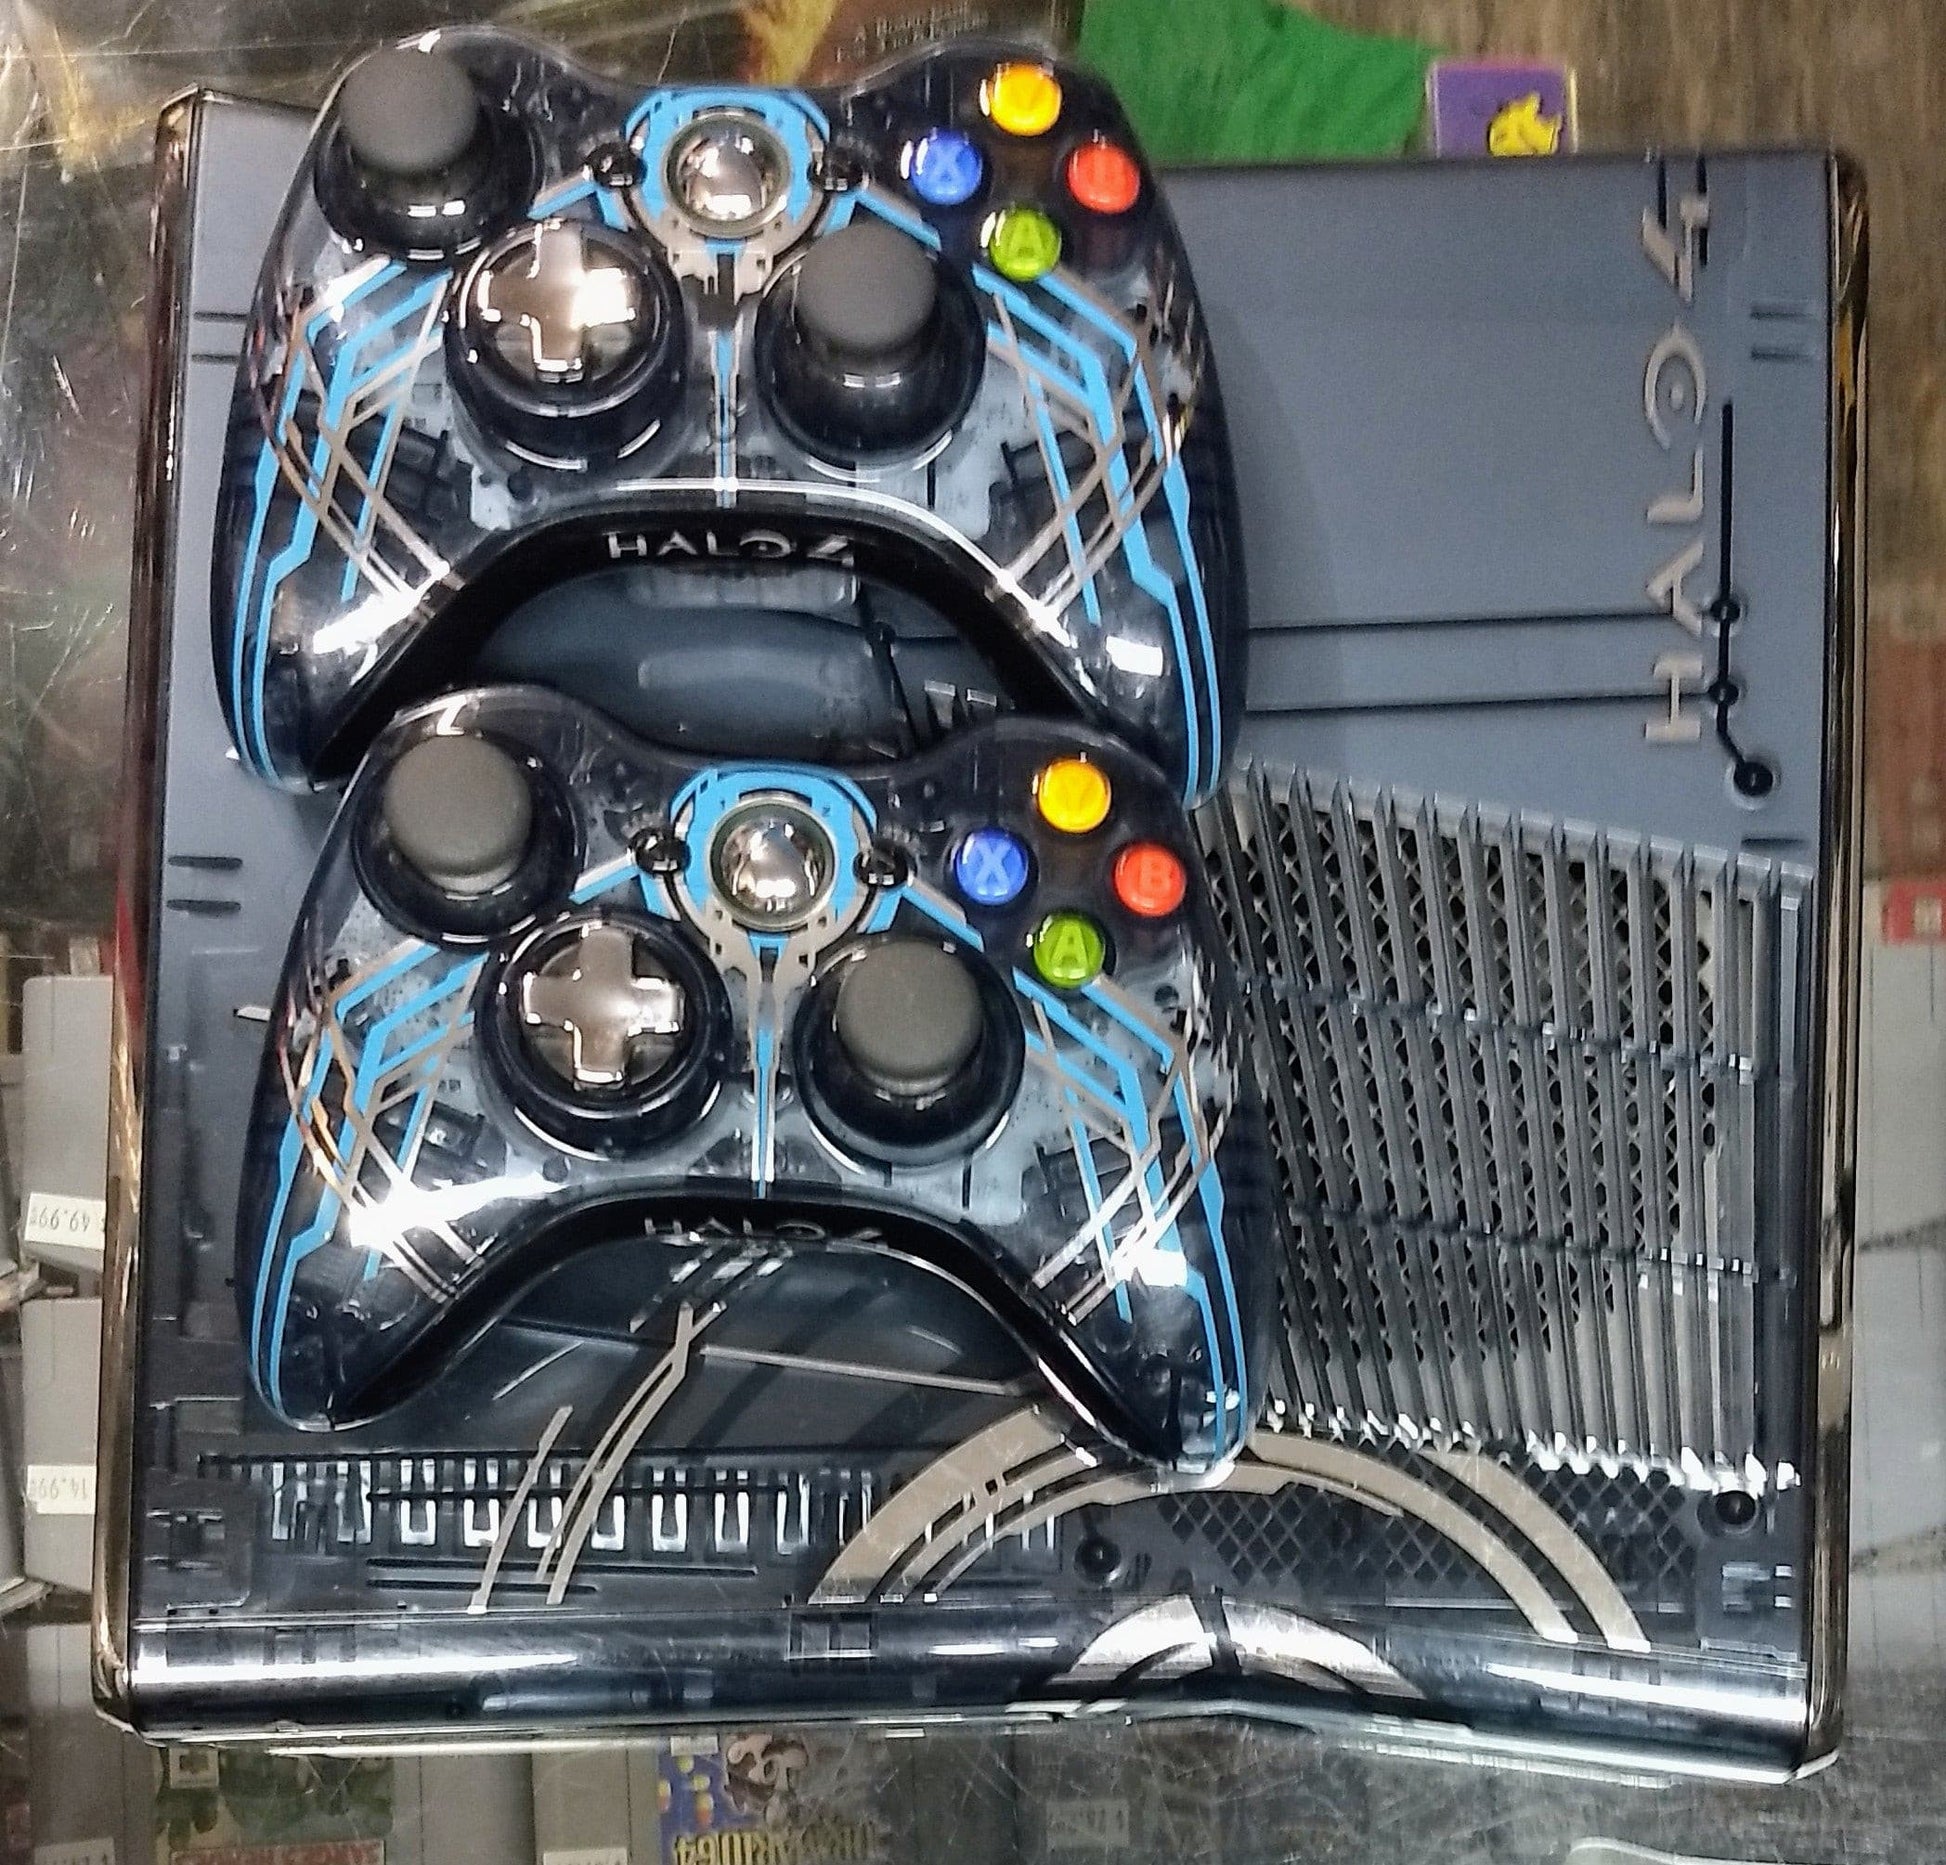 CONSOLE XBOX 360 X360 HALO 4 LIMITED EDITION 320GB BLUE SYSTEM - jeux video game-x